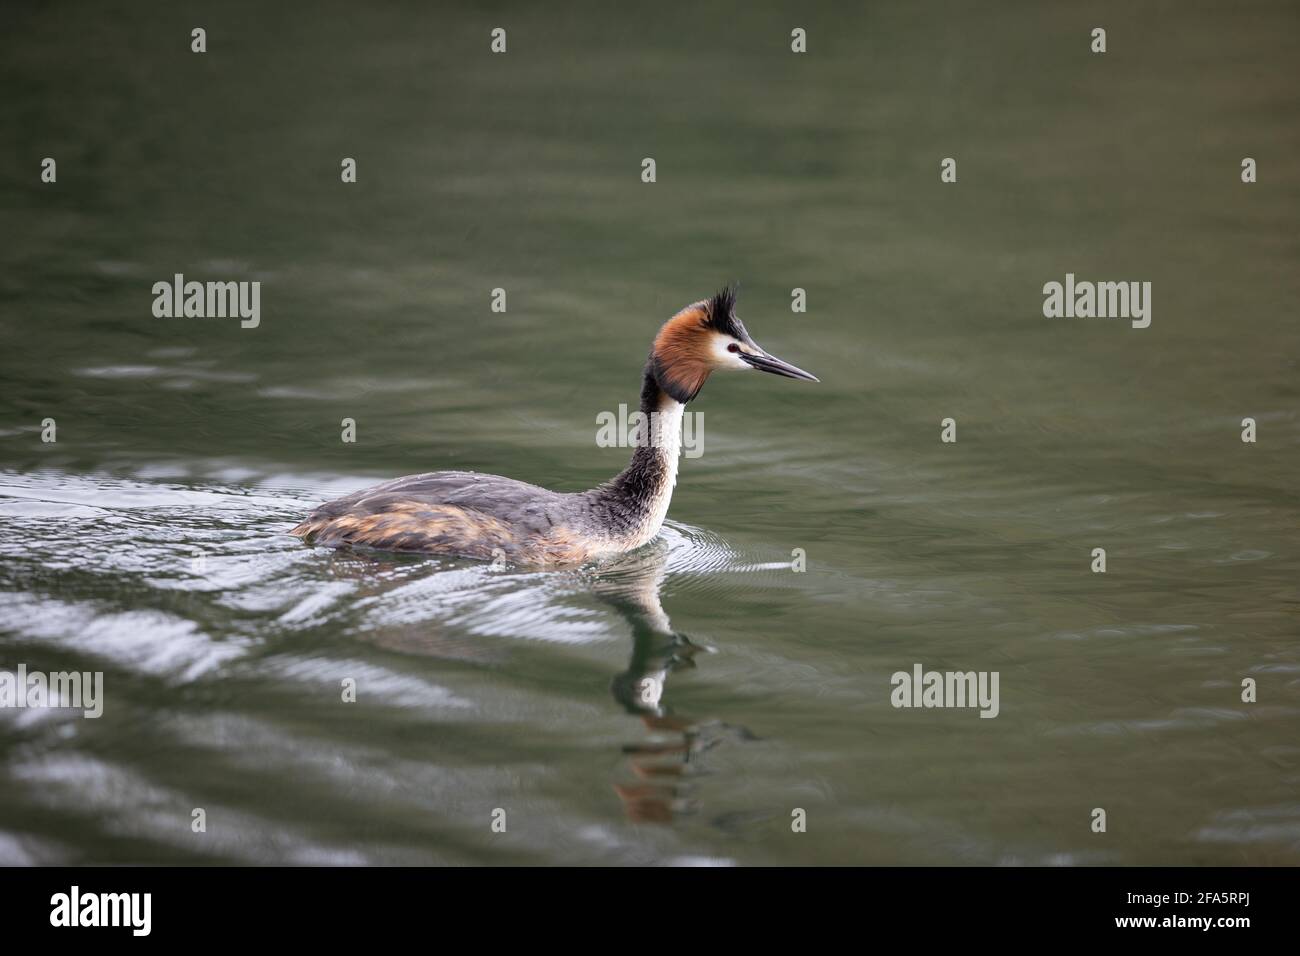 Great crested grebe, RSPB, water bird, young, English Stock Photo